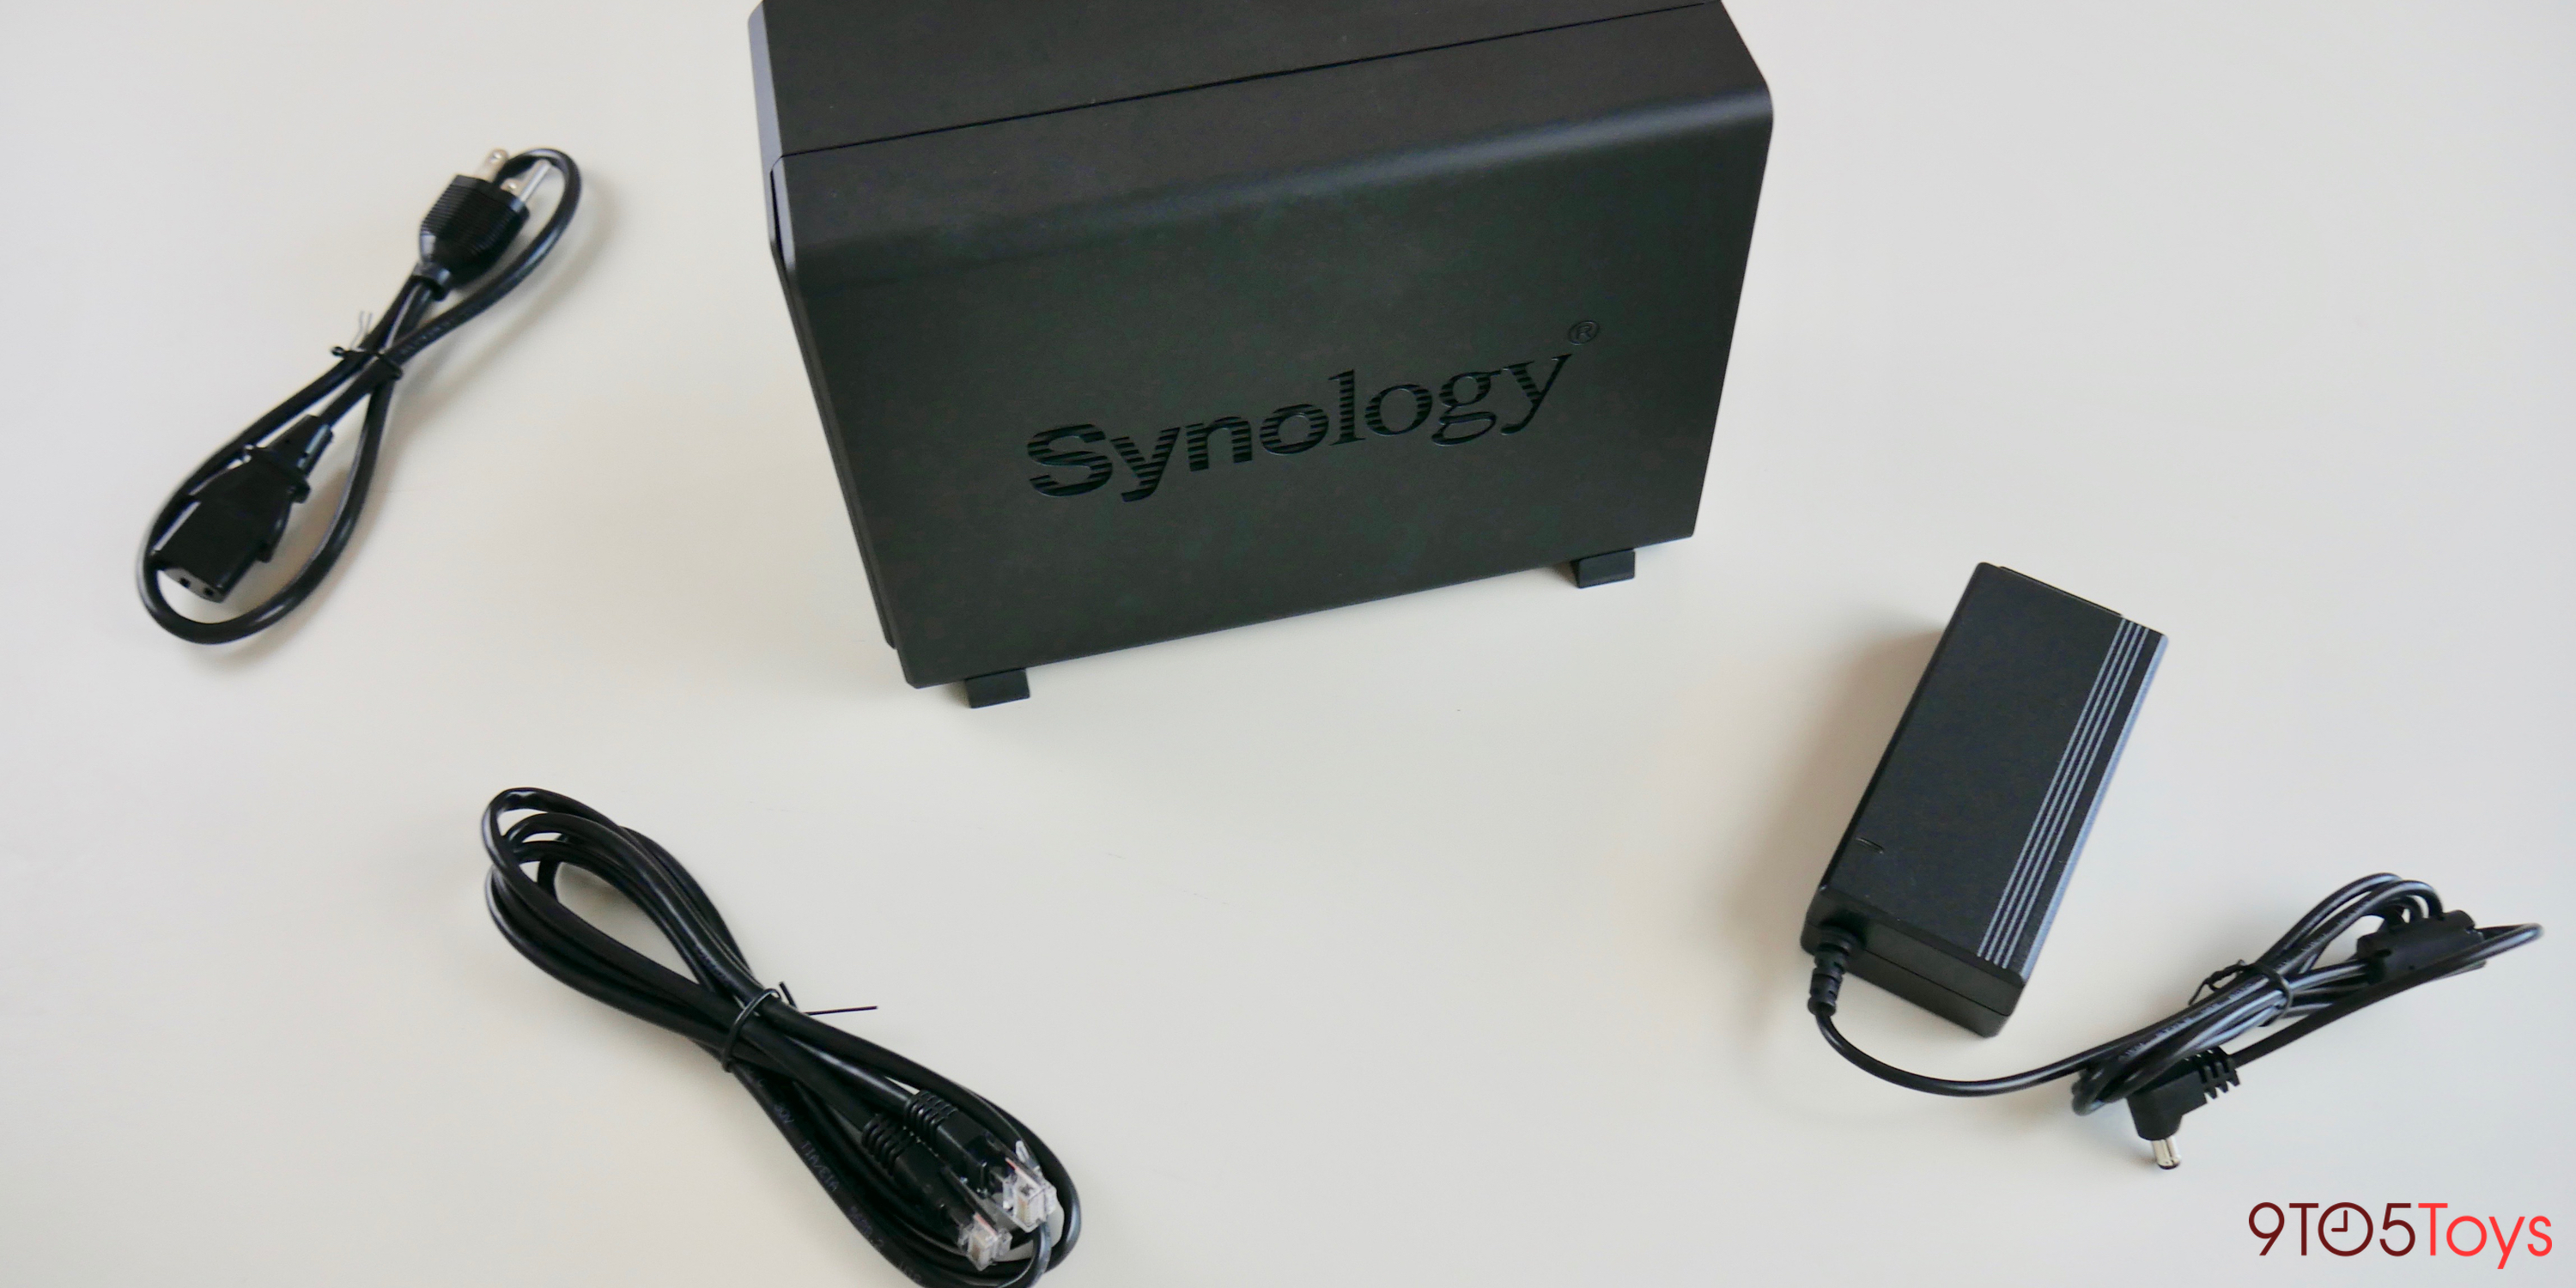 Synology DS218play is a compelling NAS for backups and more - 9to5Toys